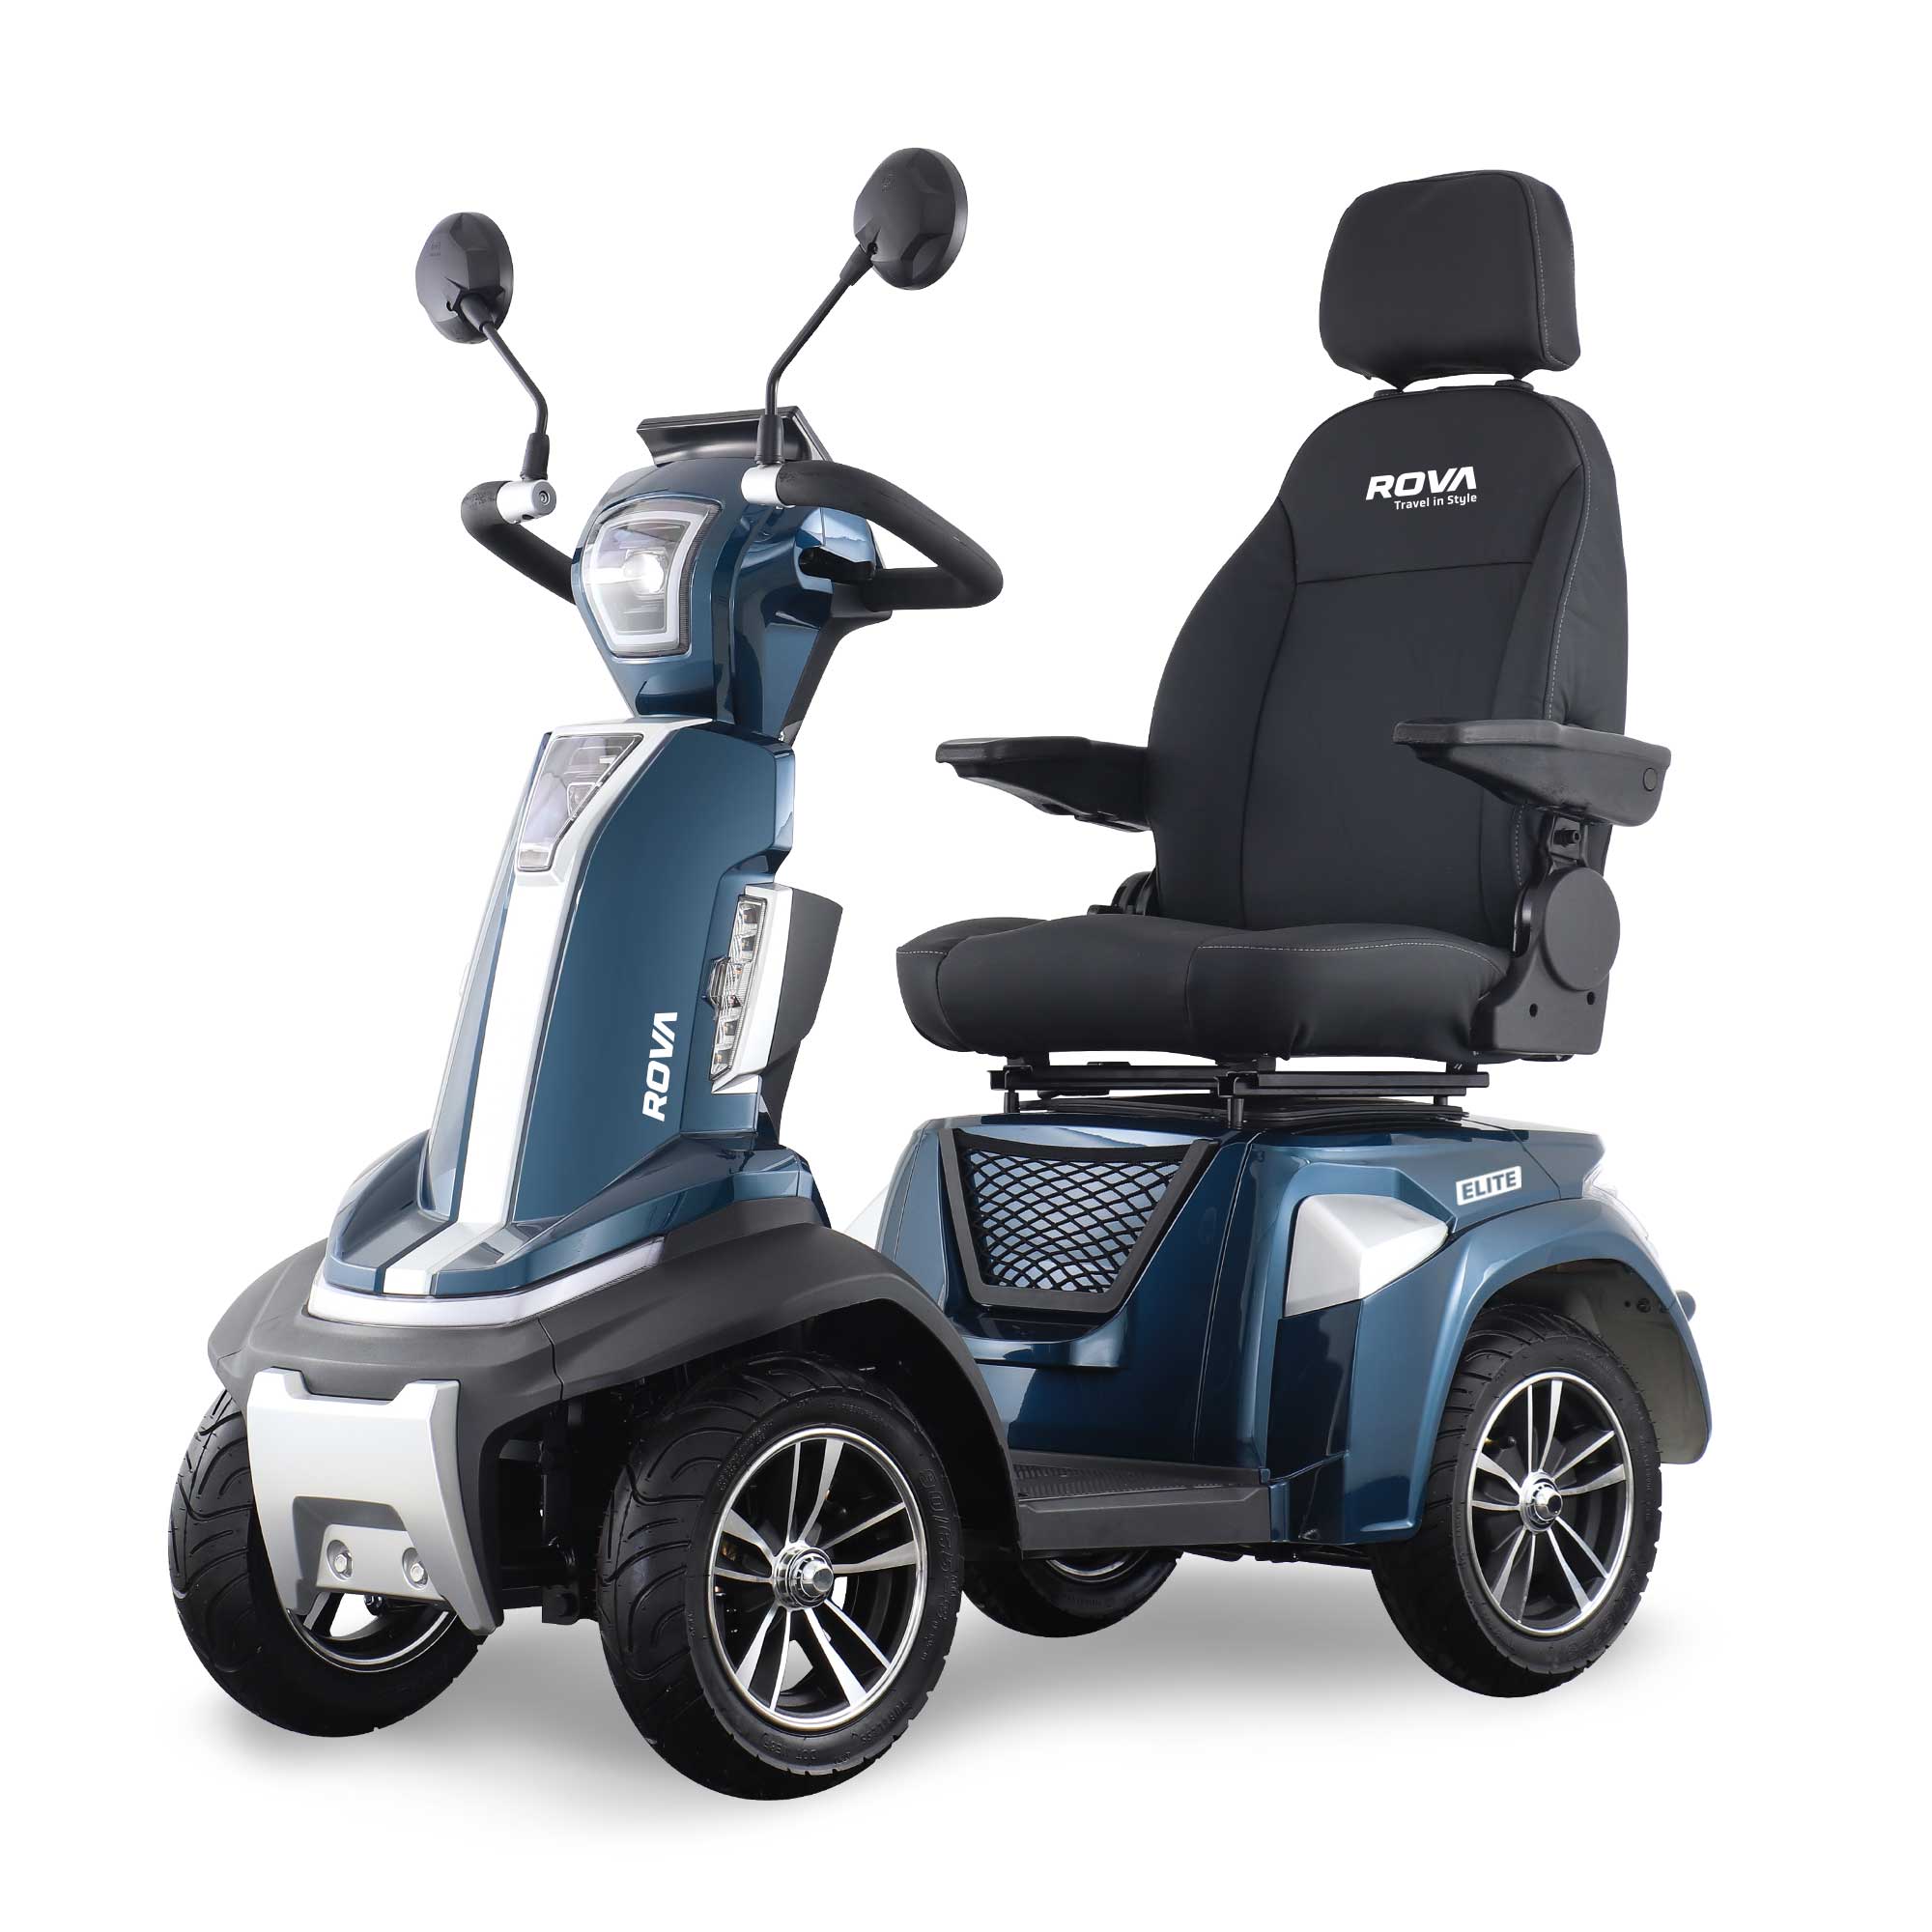 One of the best ranges of mobility scooters